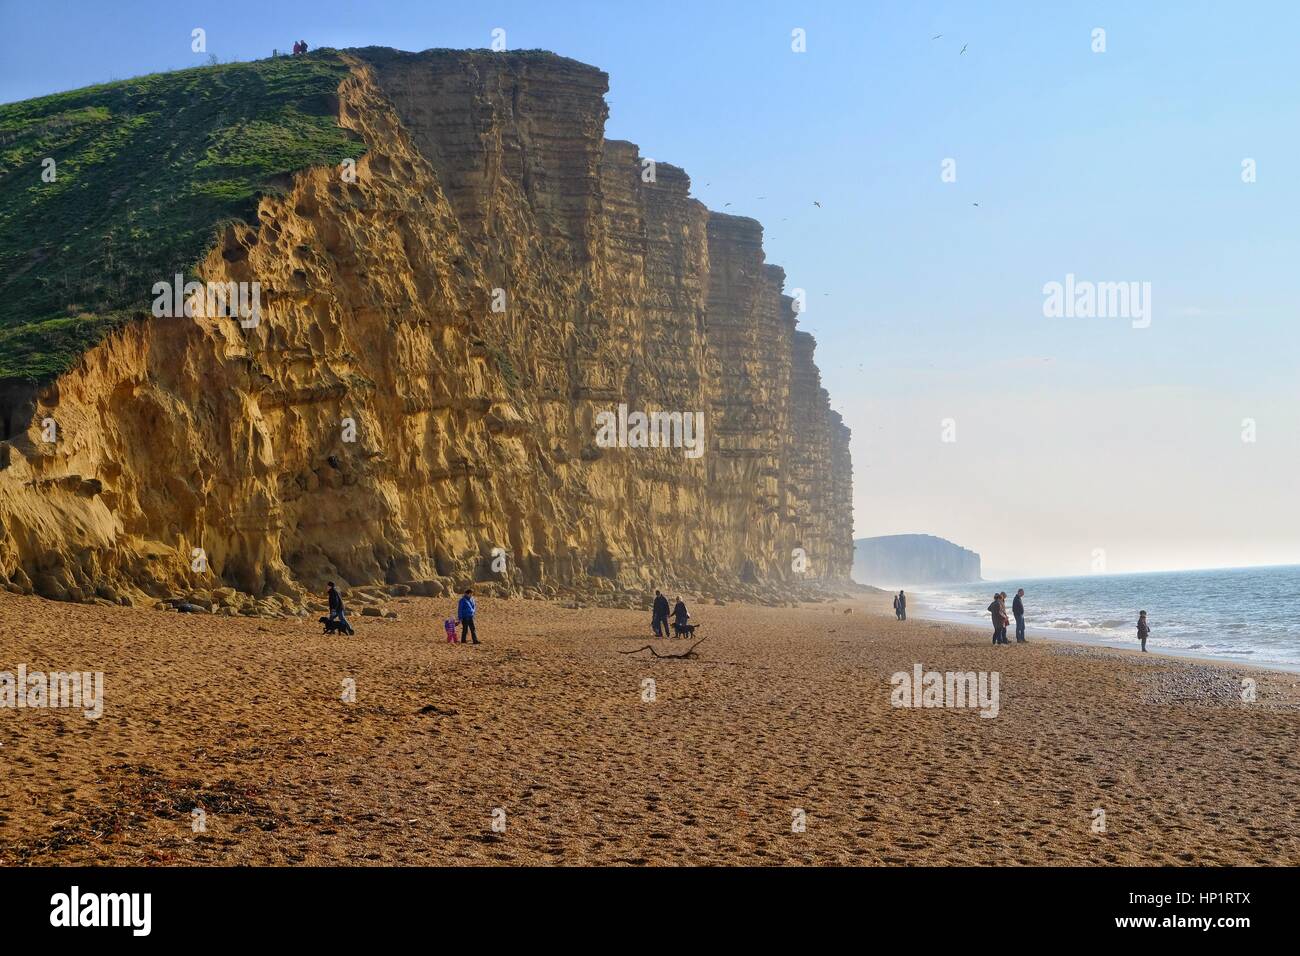 West Bay, Dorset, UK. 18 February 2017. Half term ends and the crowds leave the Dorset coast but the sunshine and unseasonably warm temperatures continue into the weekend. Credit: Tom Corban/Alamy Live News Stock Photo